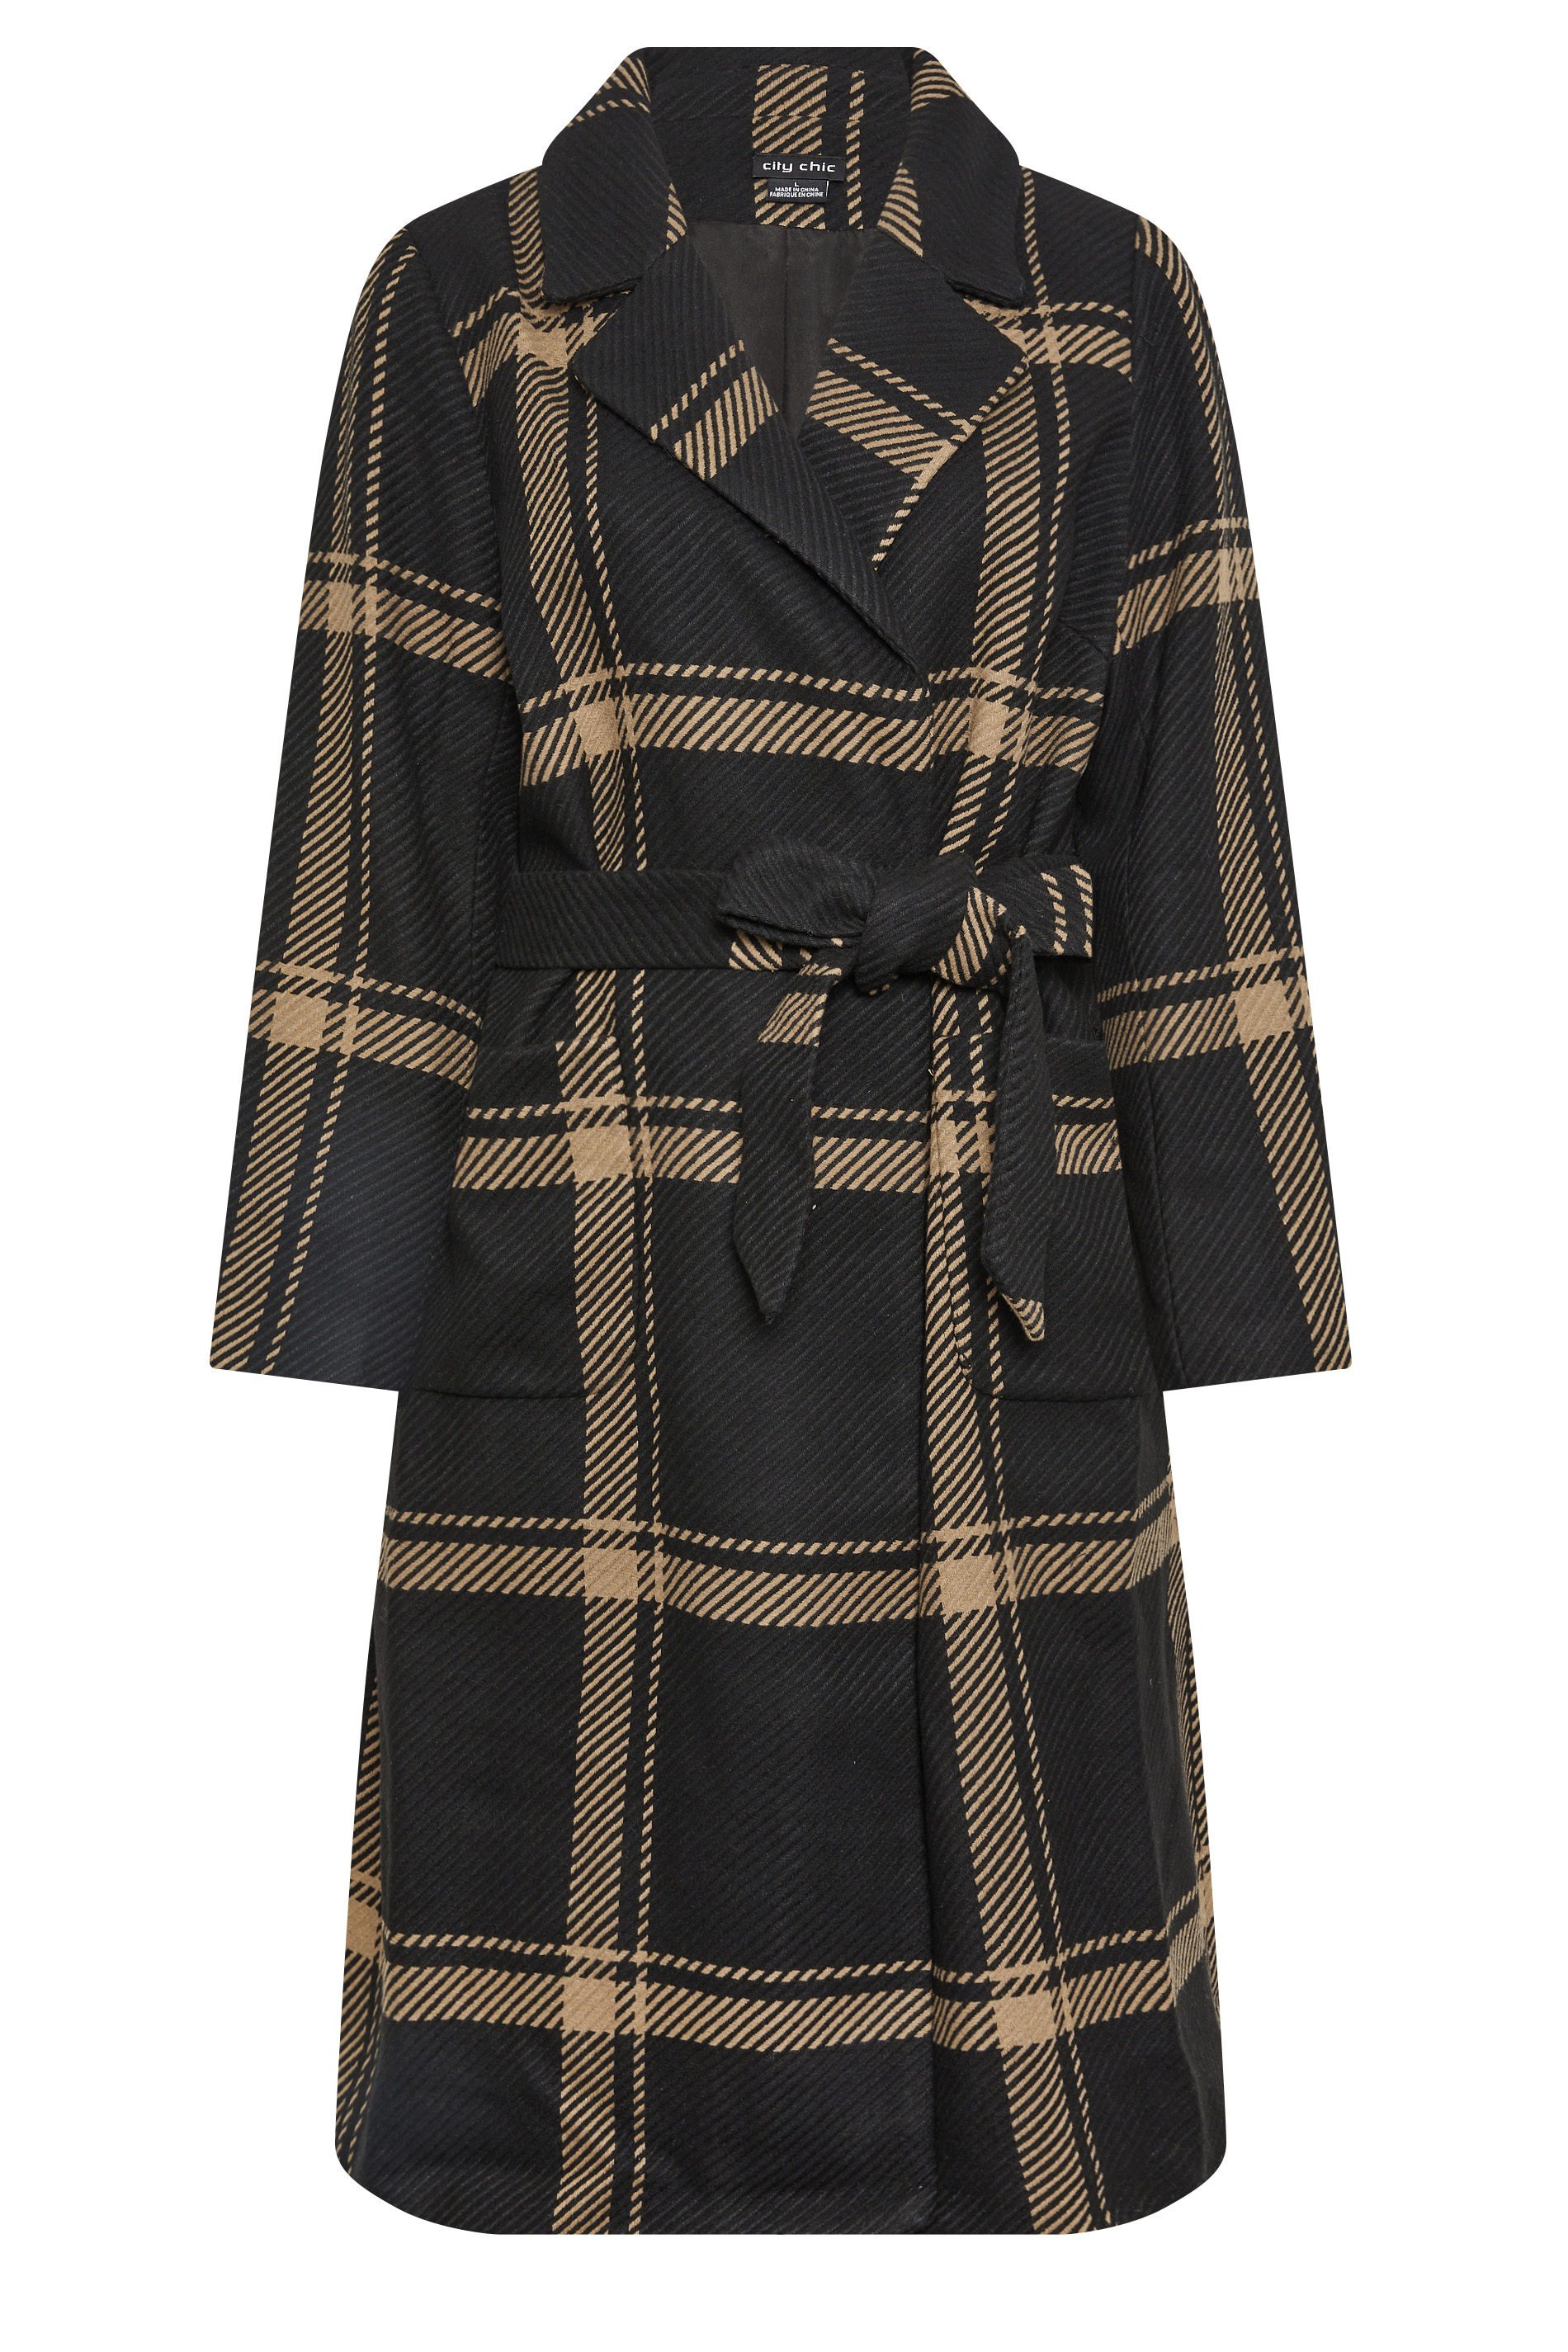 Plus Size Black & Brown Checked Coat 1